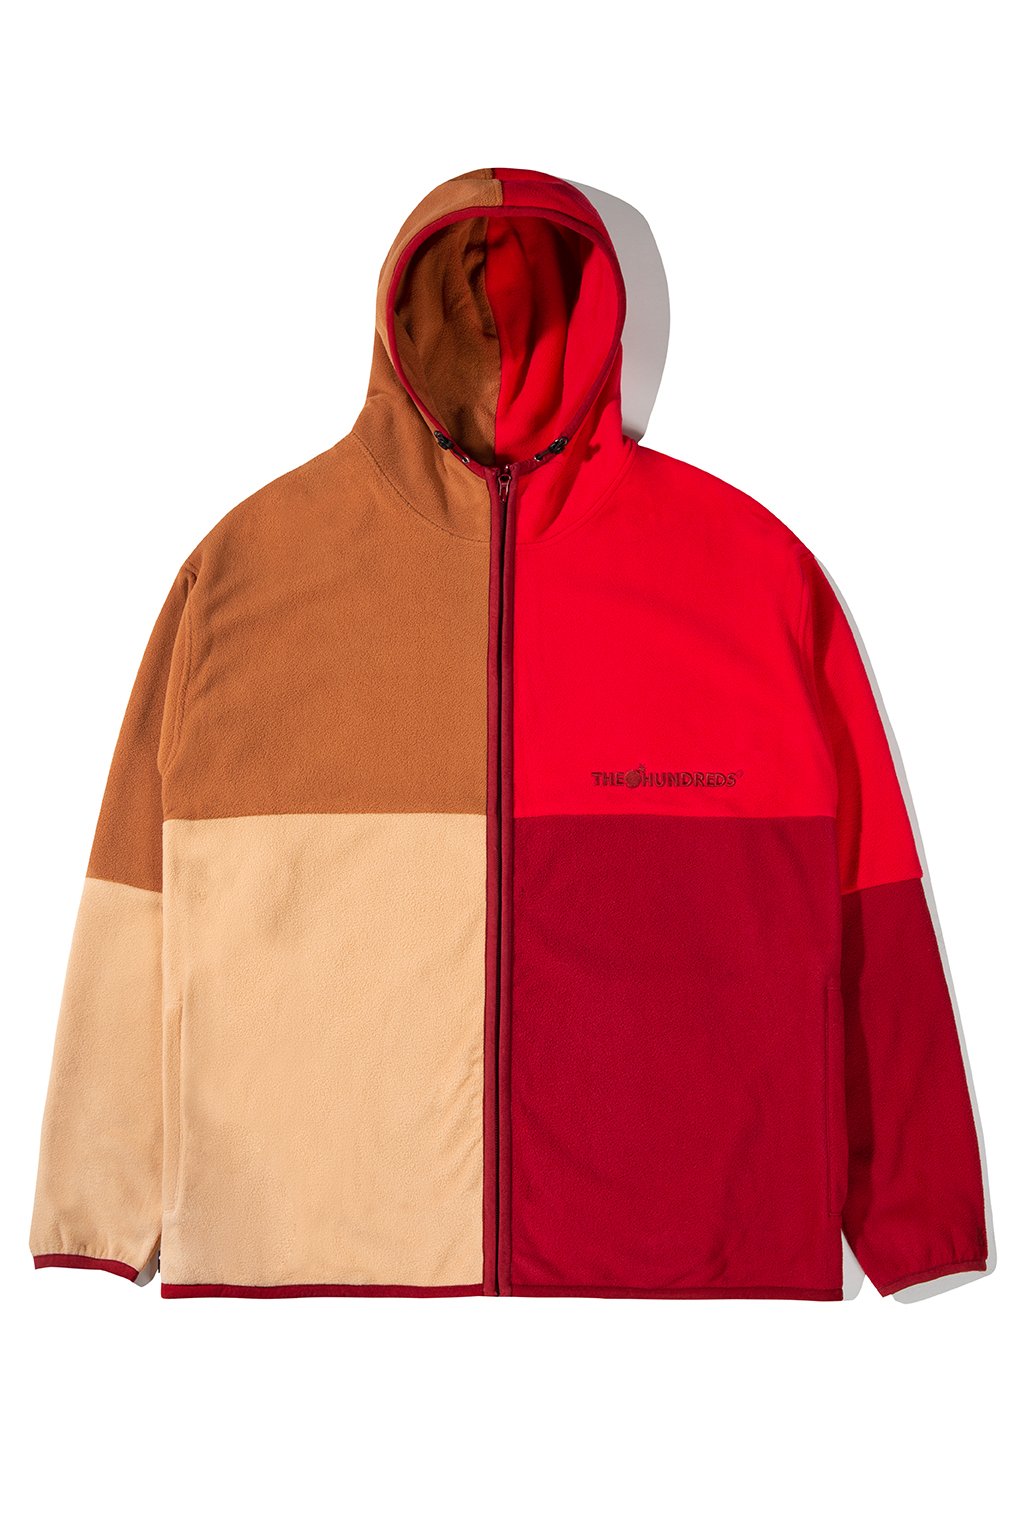 the hundreds hoodie beige